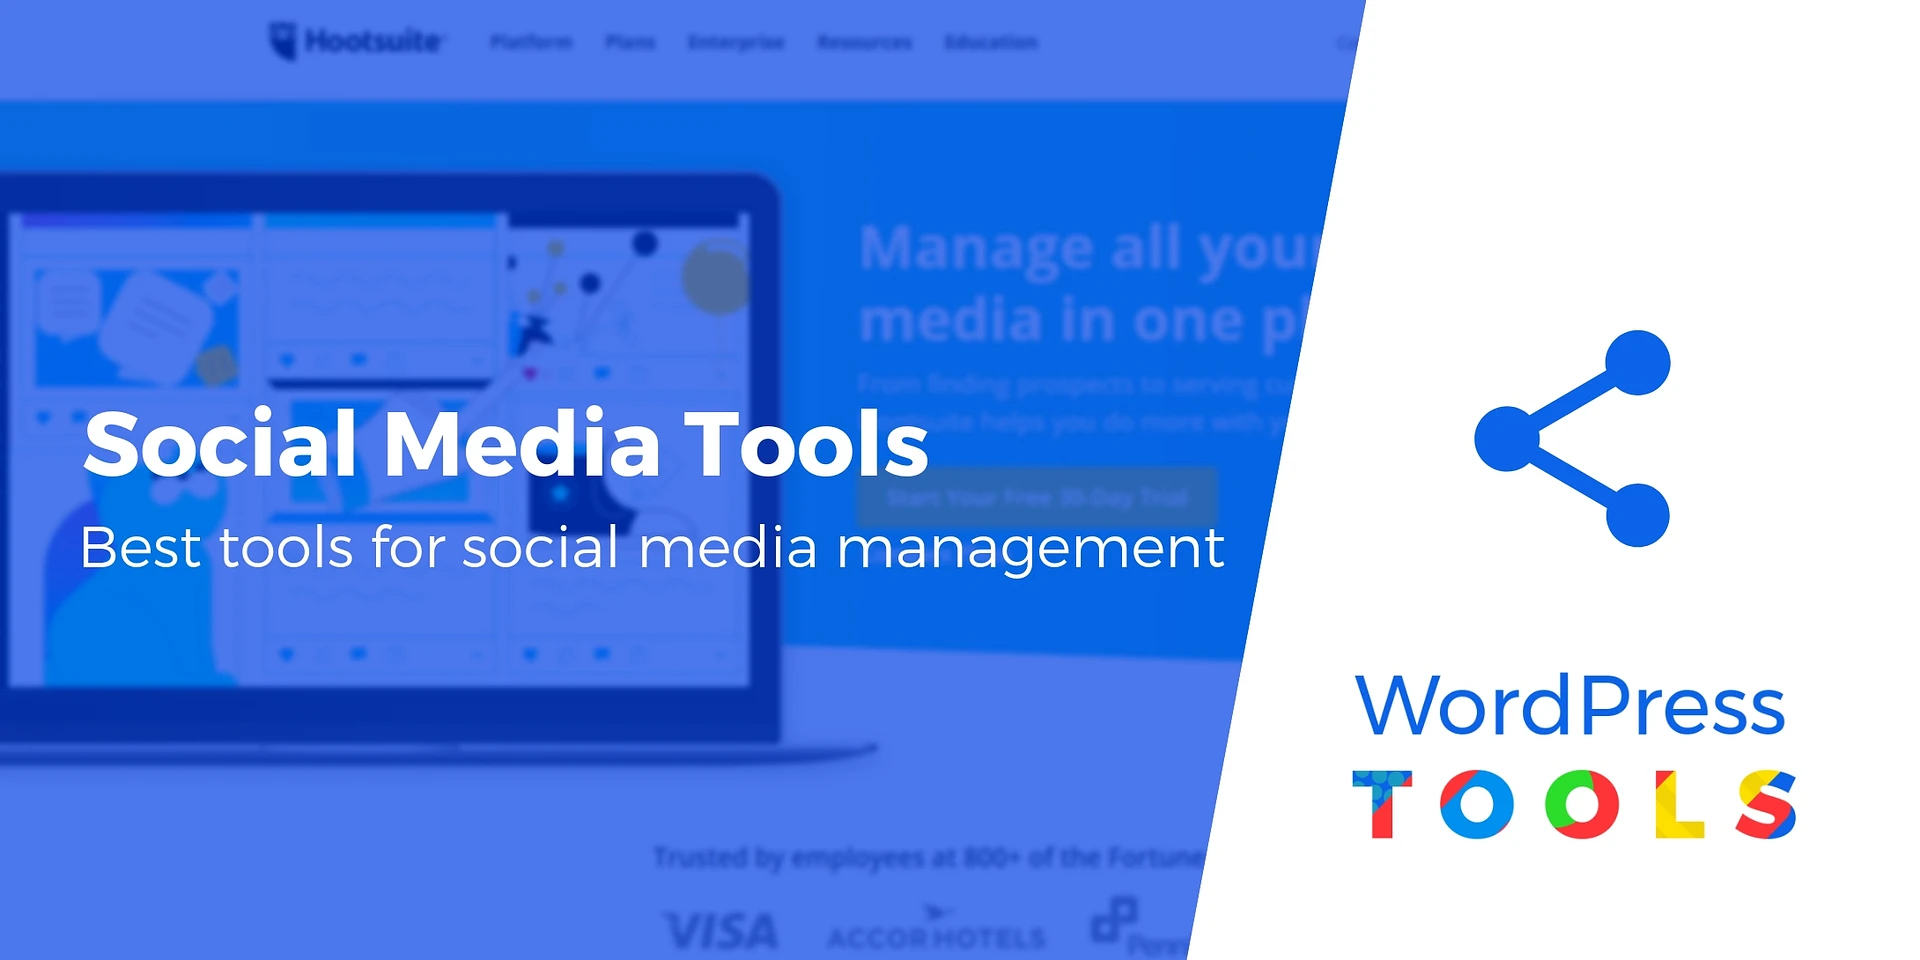 Joinpd: A Powerful Social Media Management Tool